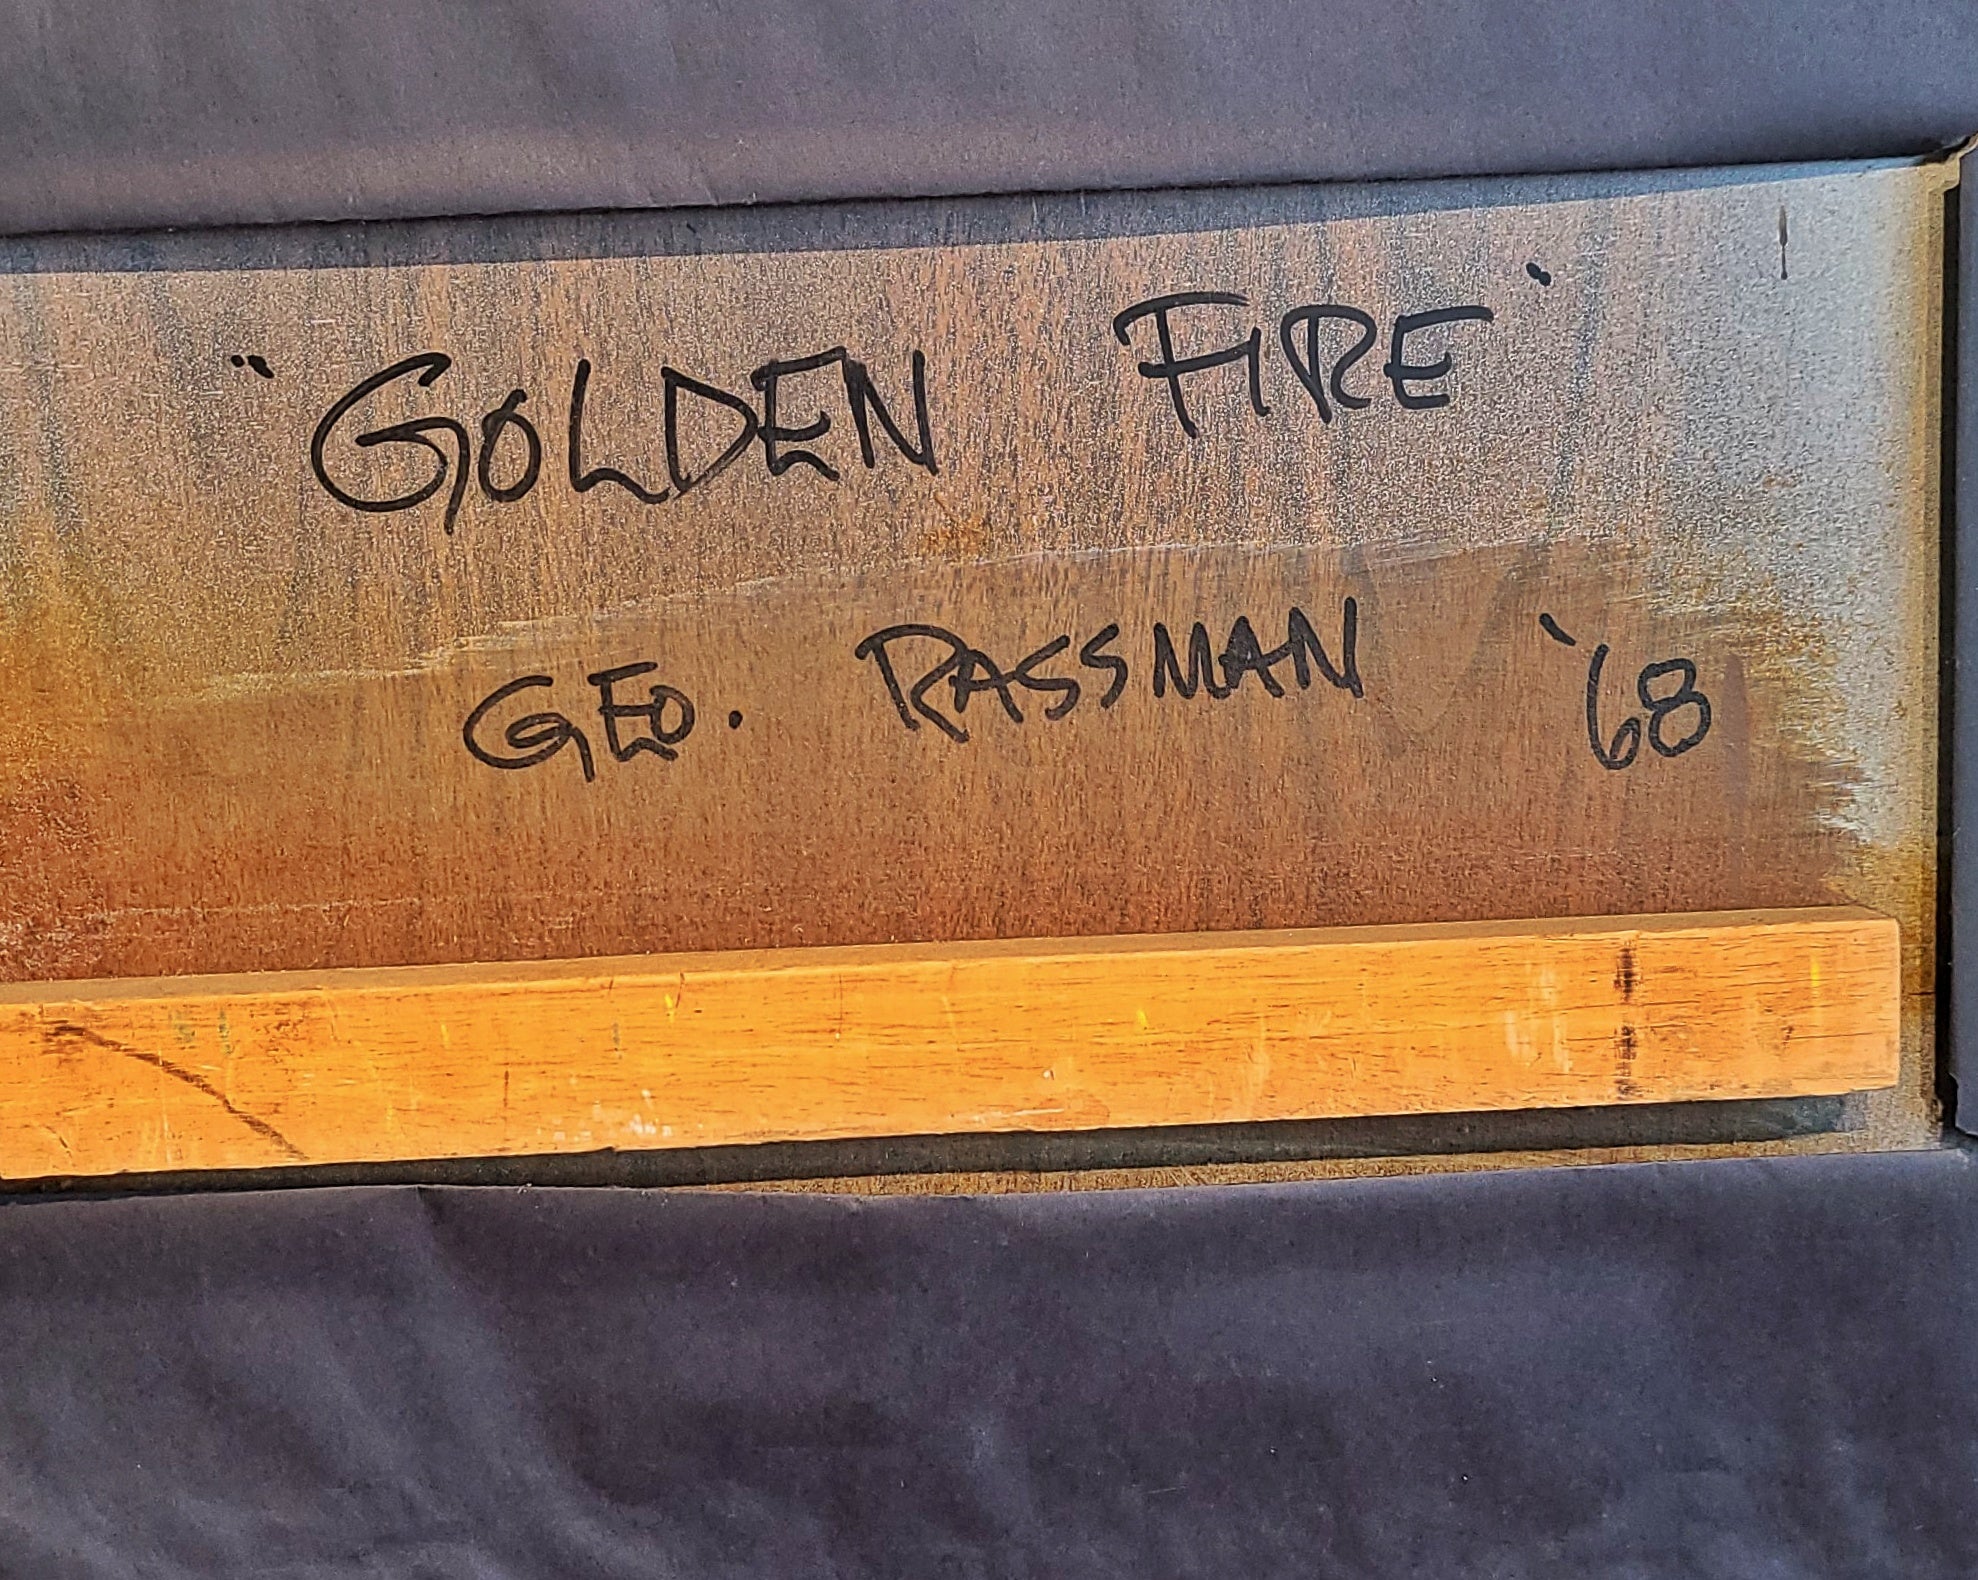 'GOLDEN FIRE' POLYMER ON PANEL BY GEORGE RASSMAN (1968)